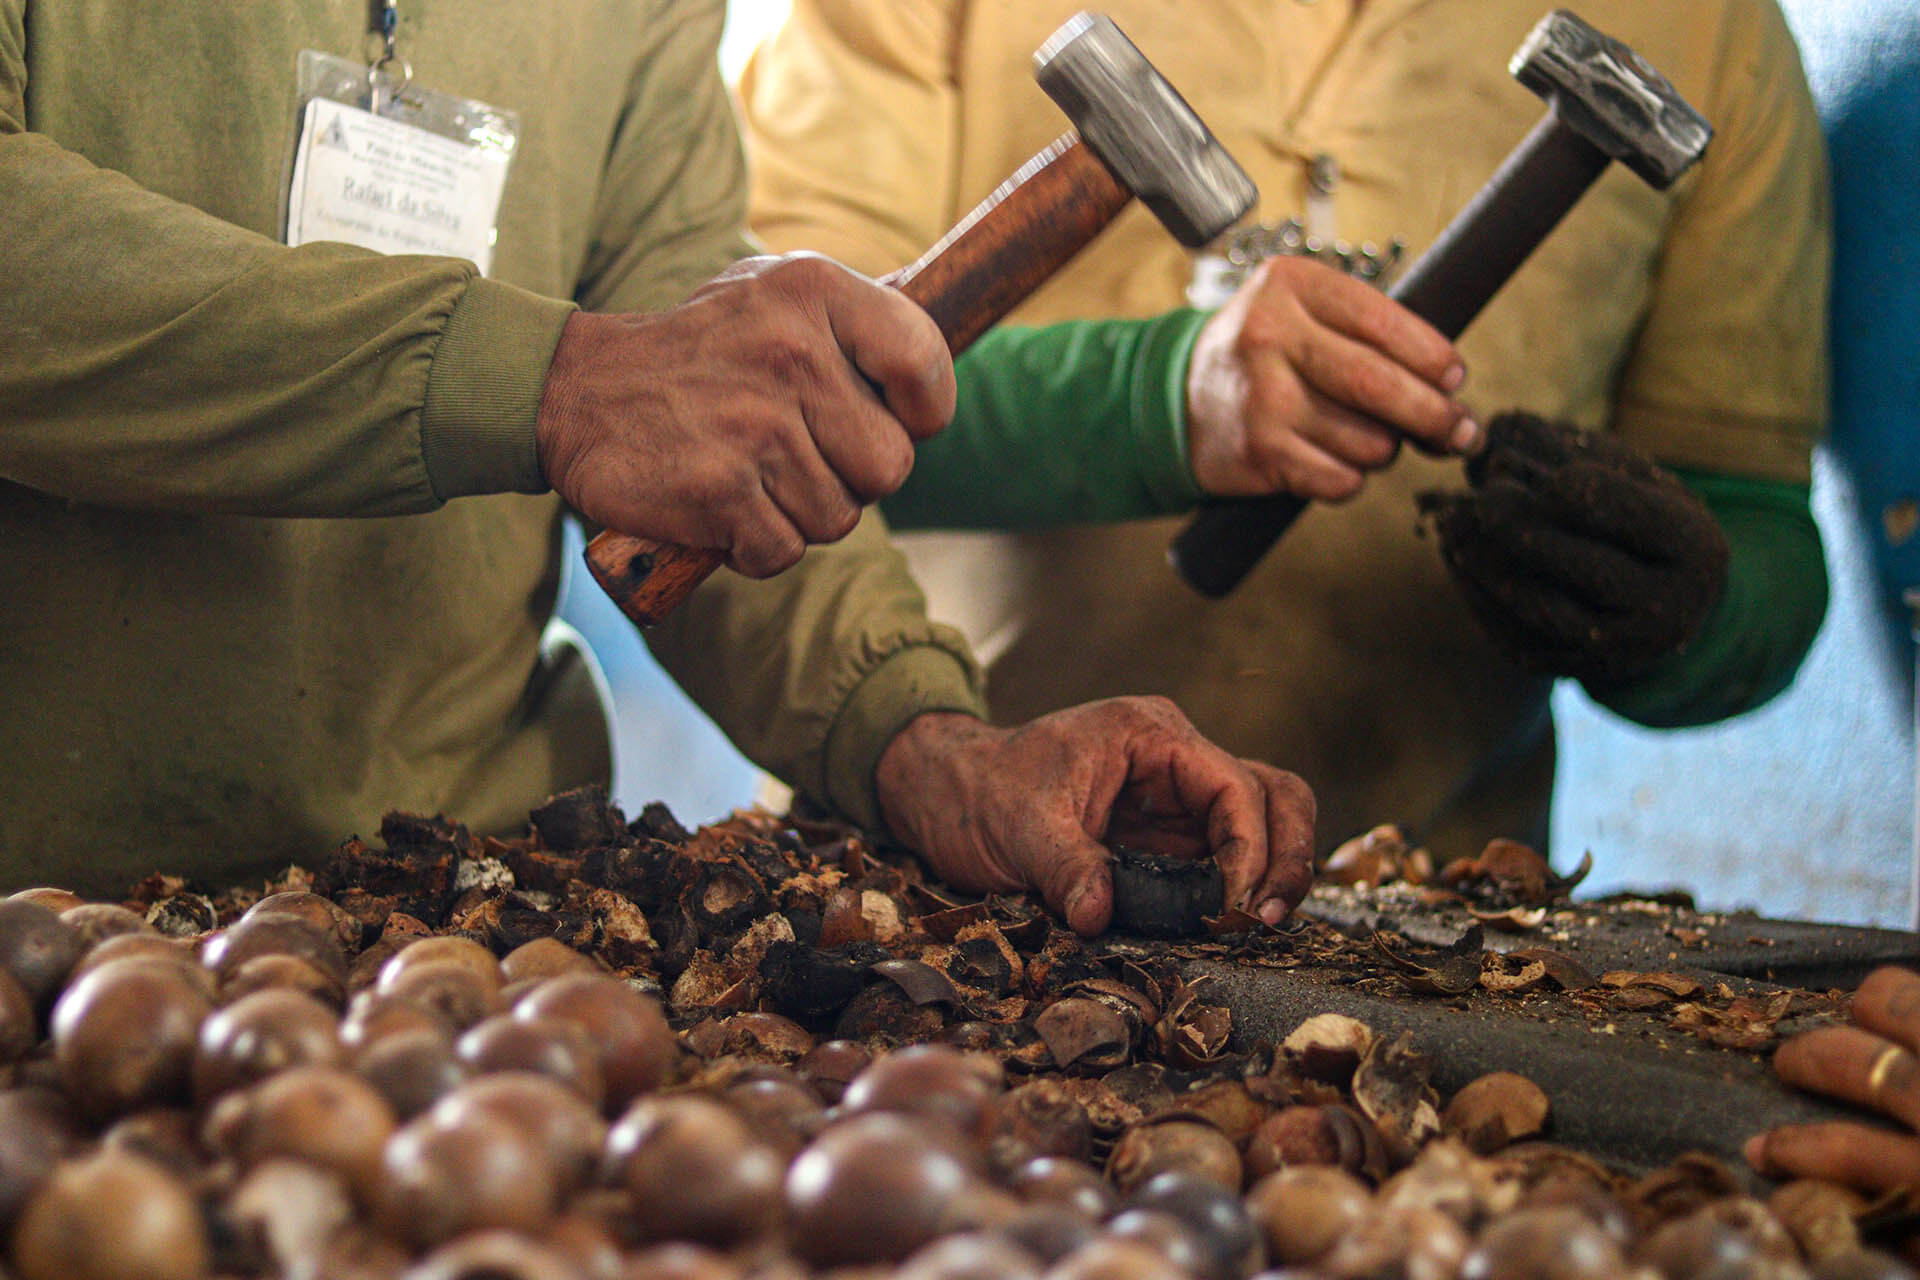 Participants in Brazil’s work program for the incarcerated (APAC) are employed to crack the Macaúba nuts with hammers, releasing the seed embryo which will germinate in a lab.